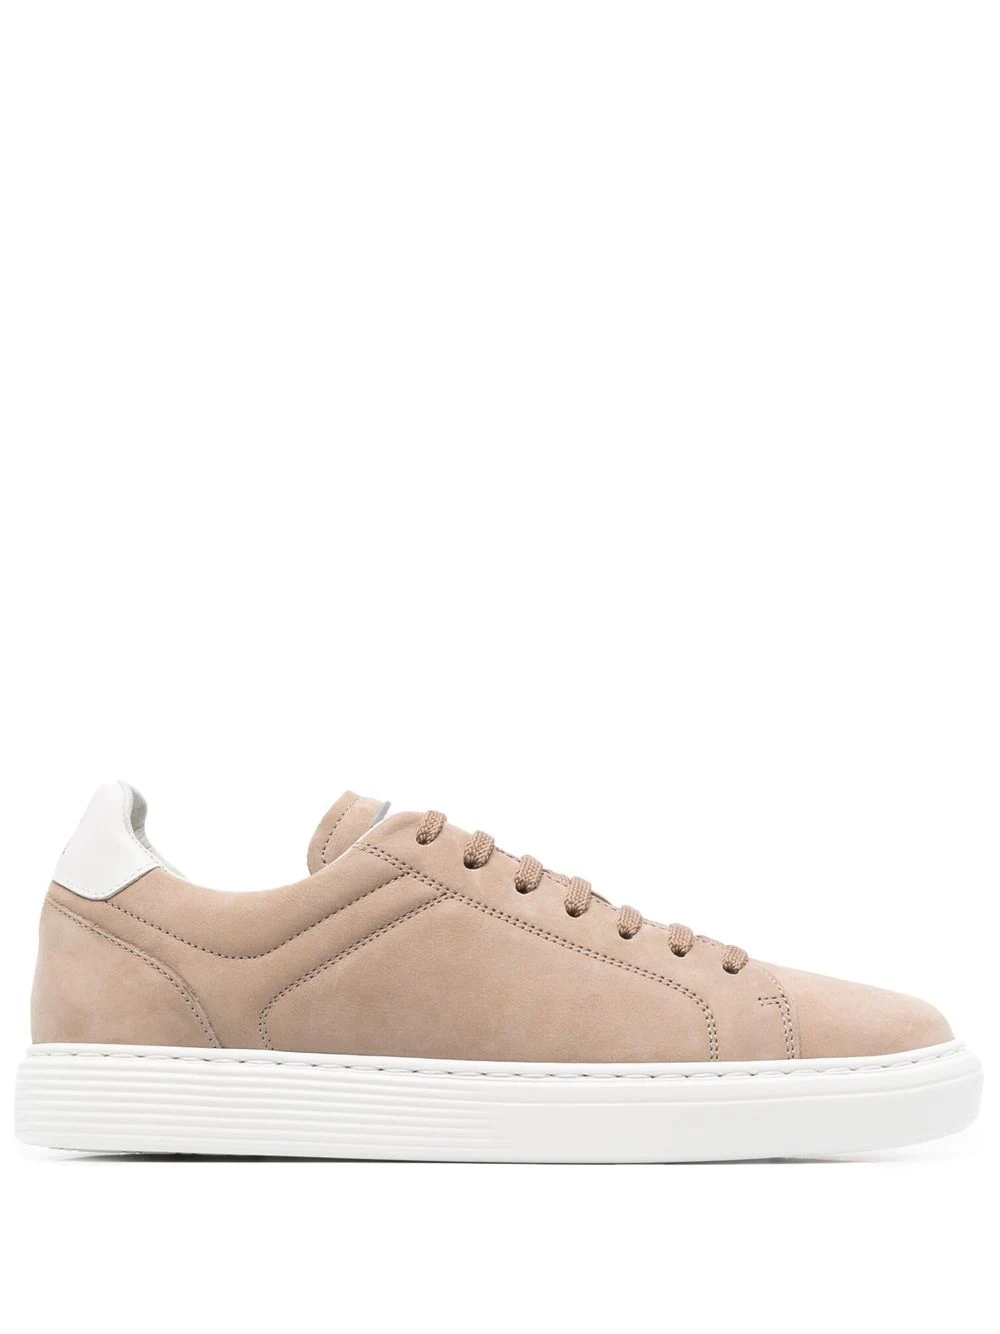 BRUNELLO CUCINELLI SUEDE LACE-UP SNEAKERS